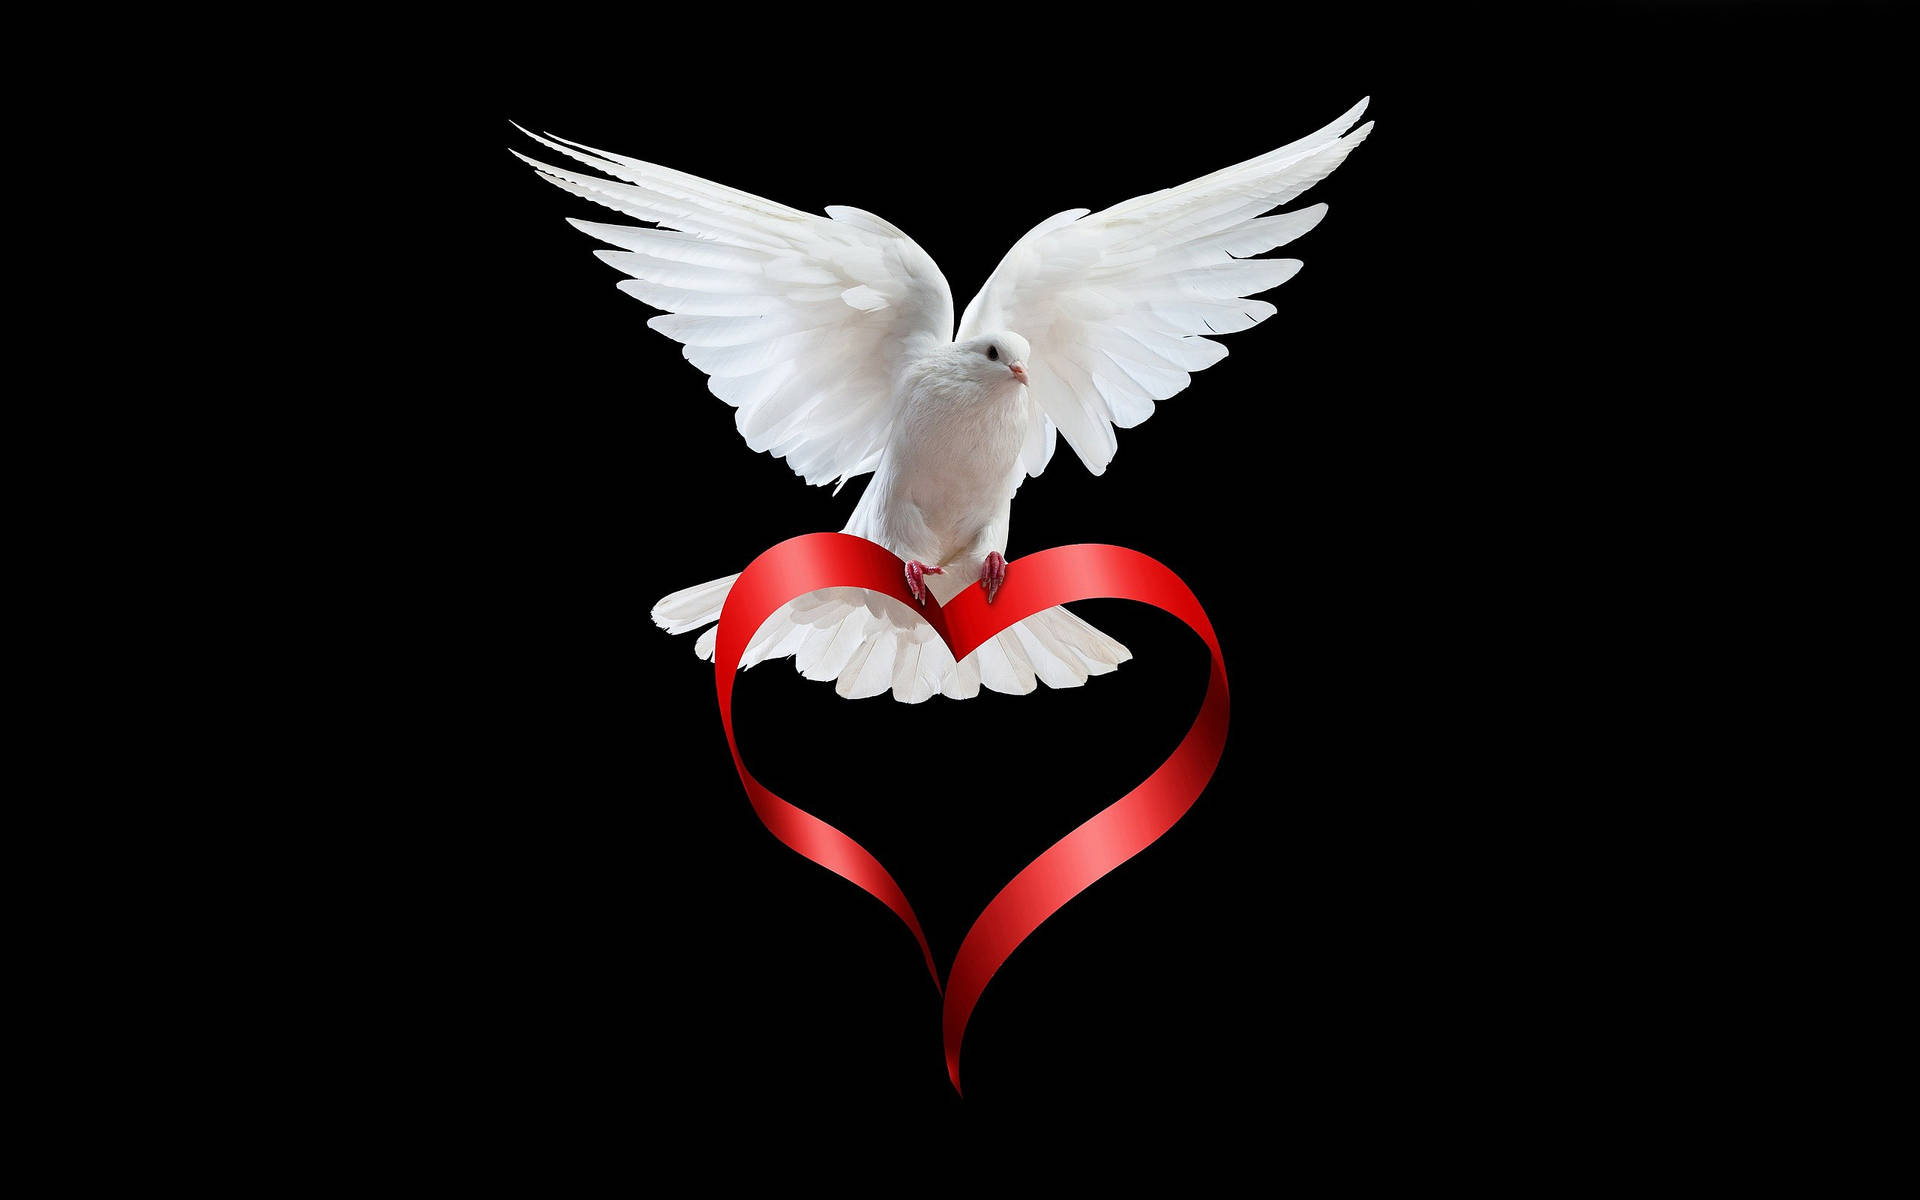 White Dove Holding A Red Heart Wallpaper